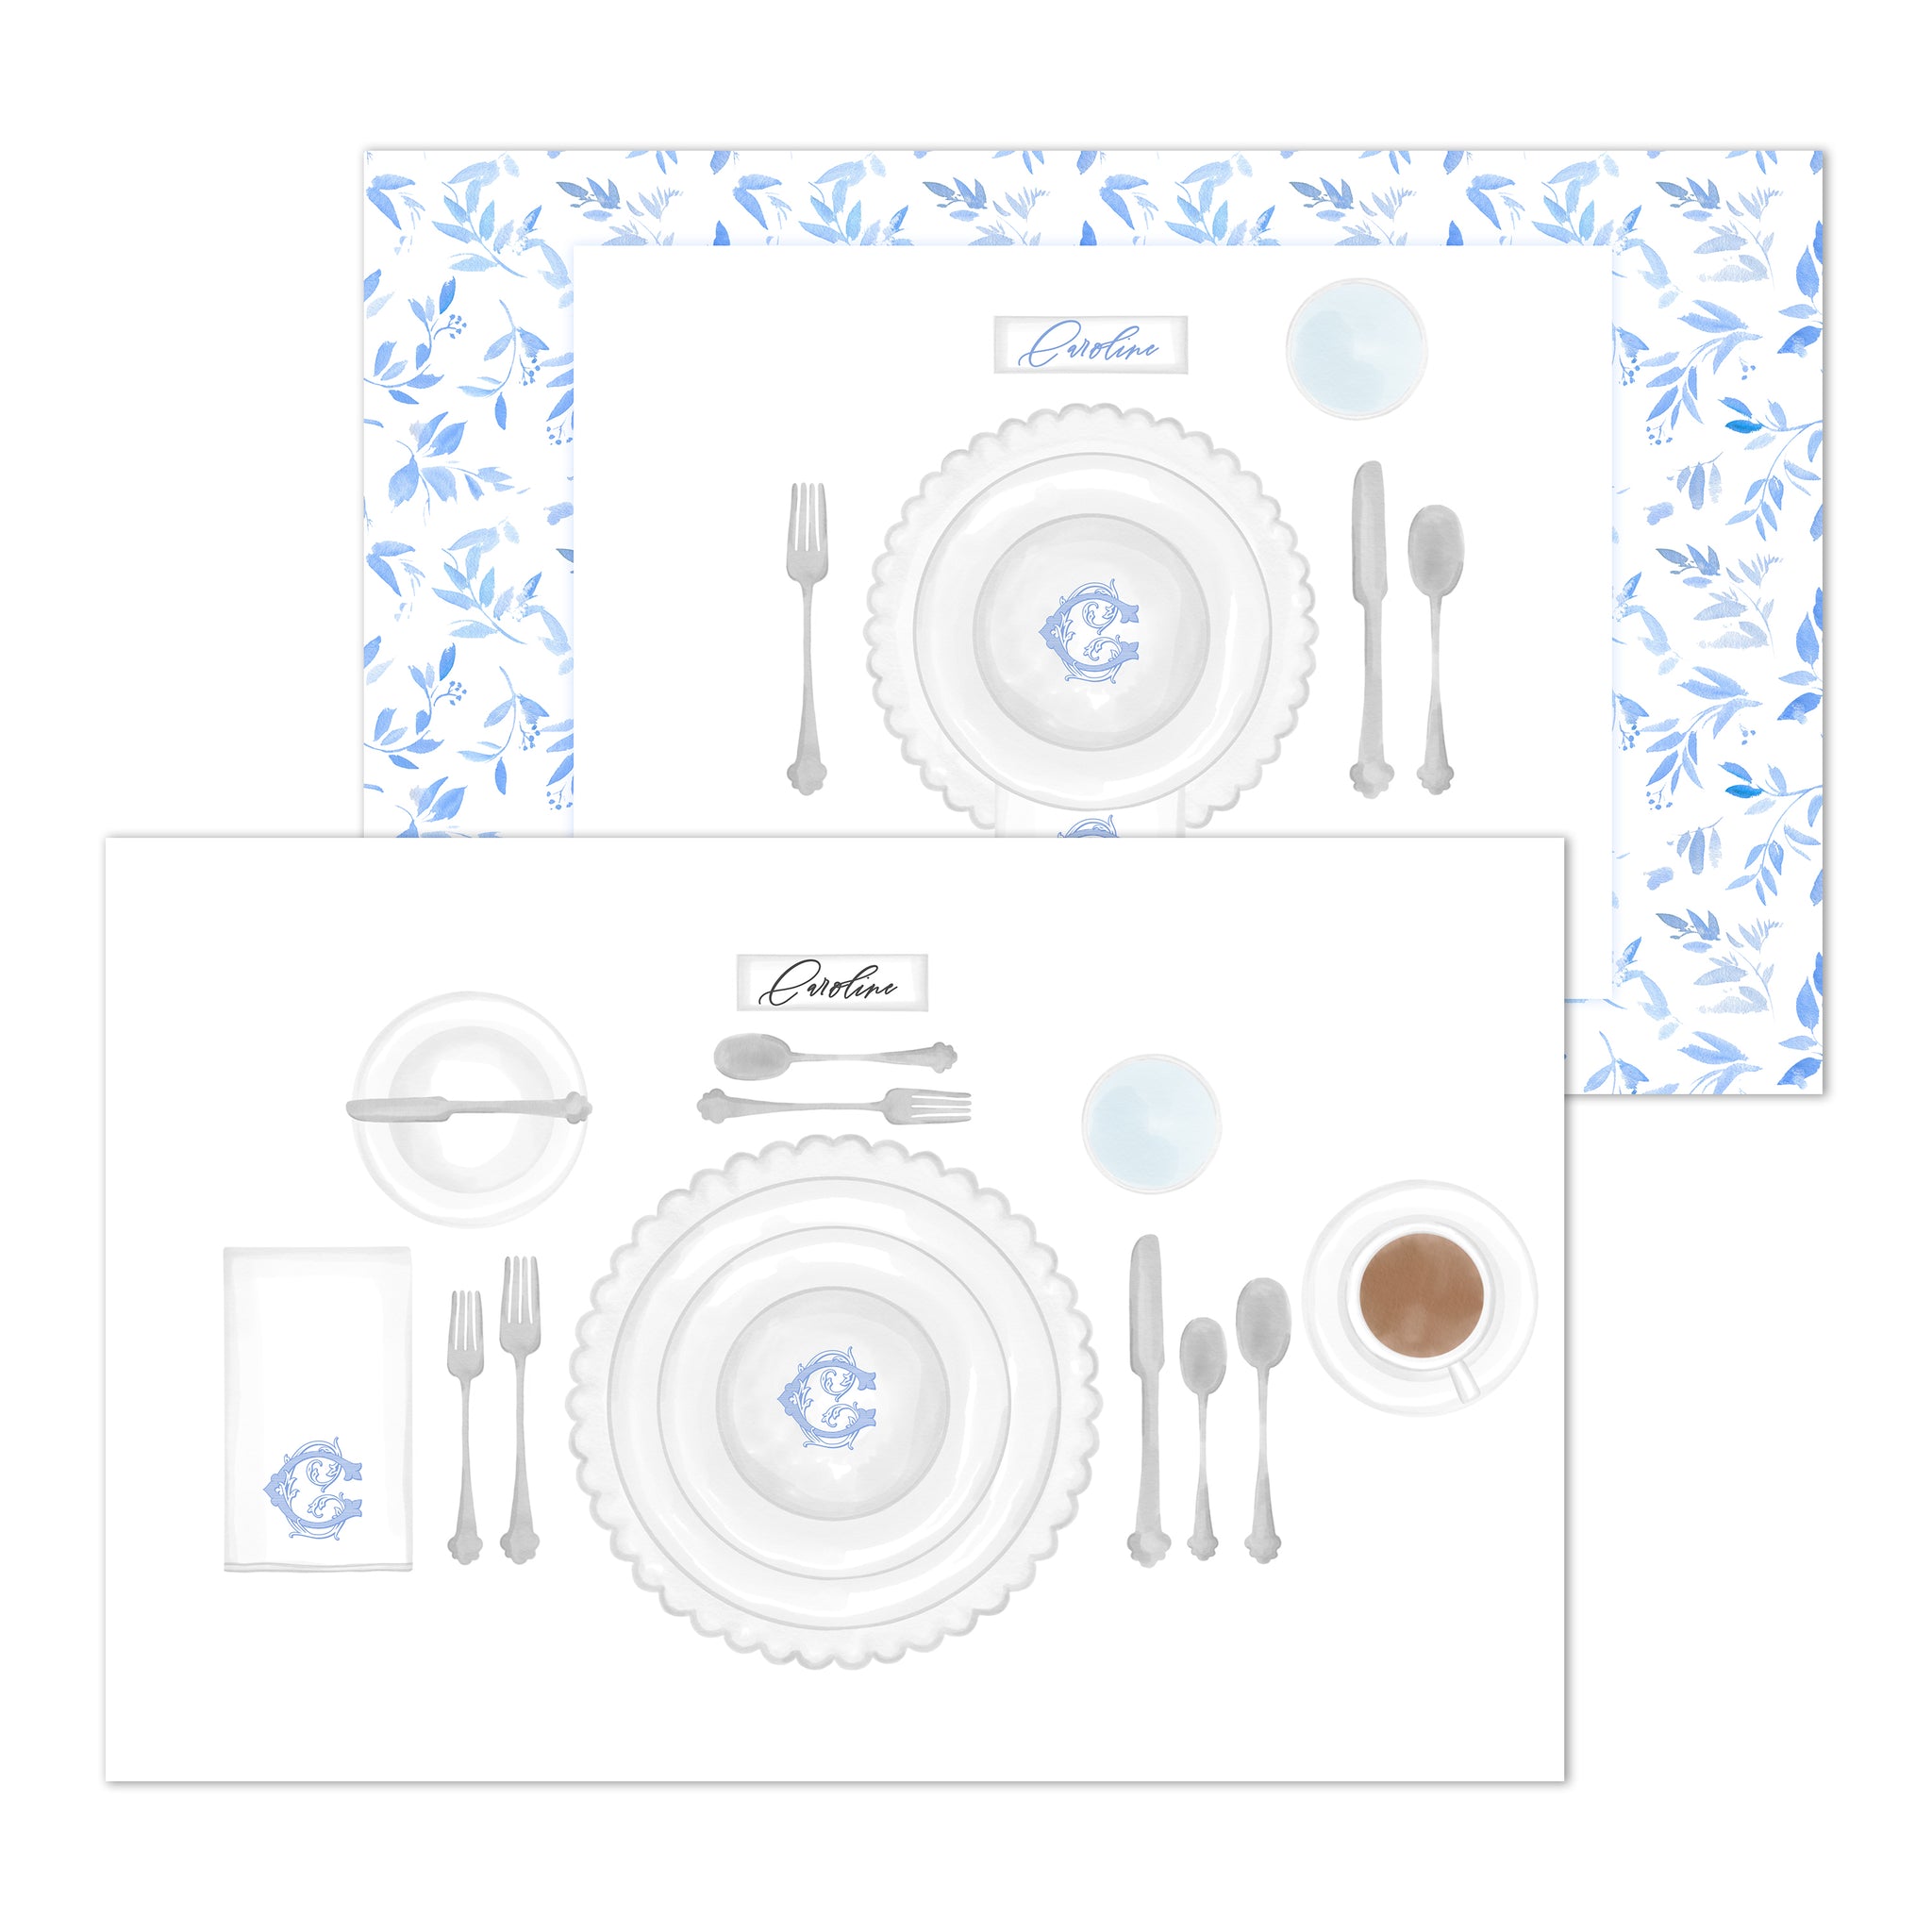 "How To Set A Table" Laminated Placemat, Blue Floral